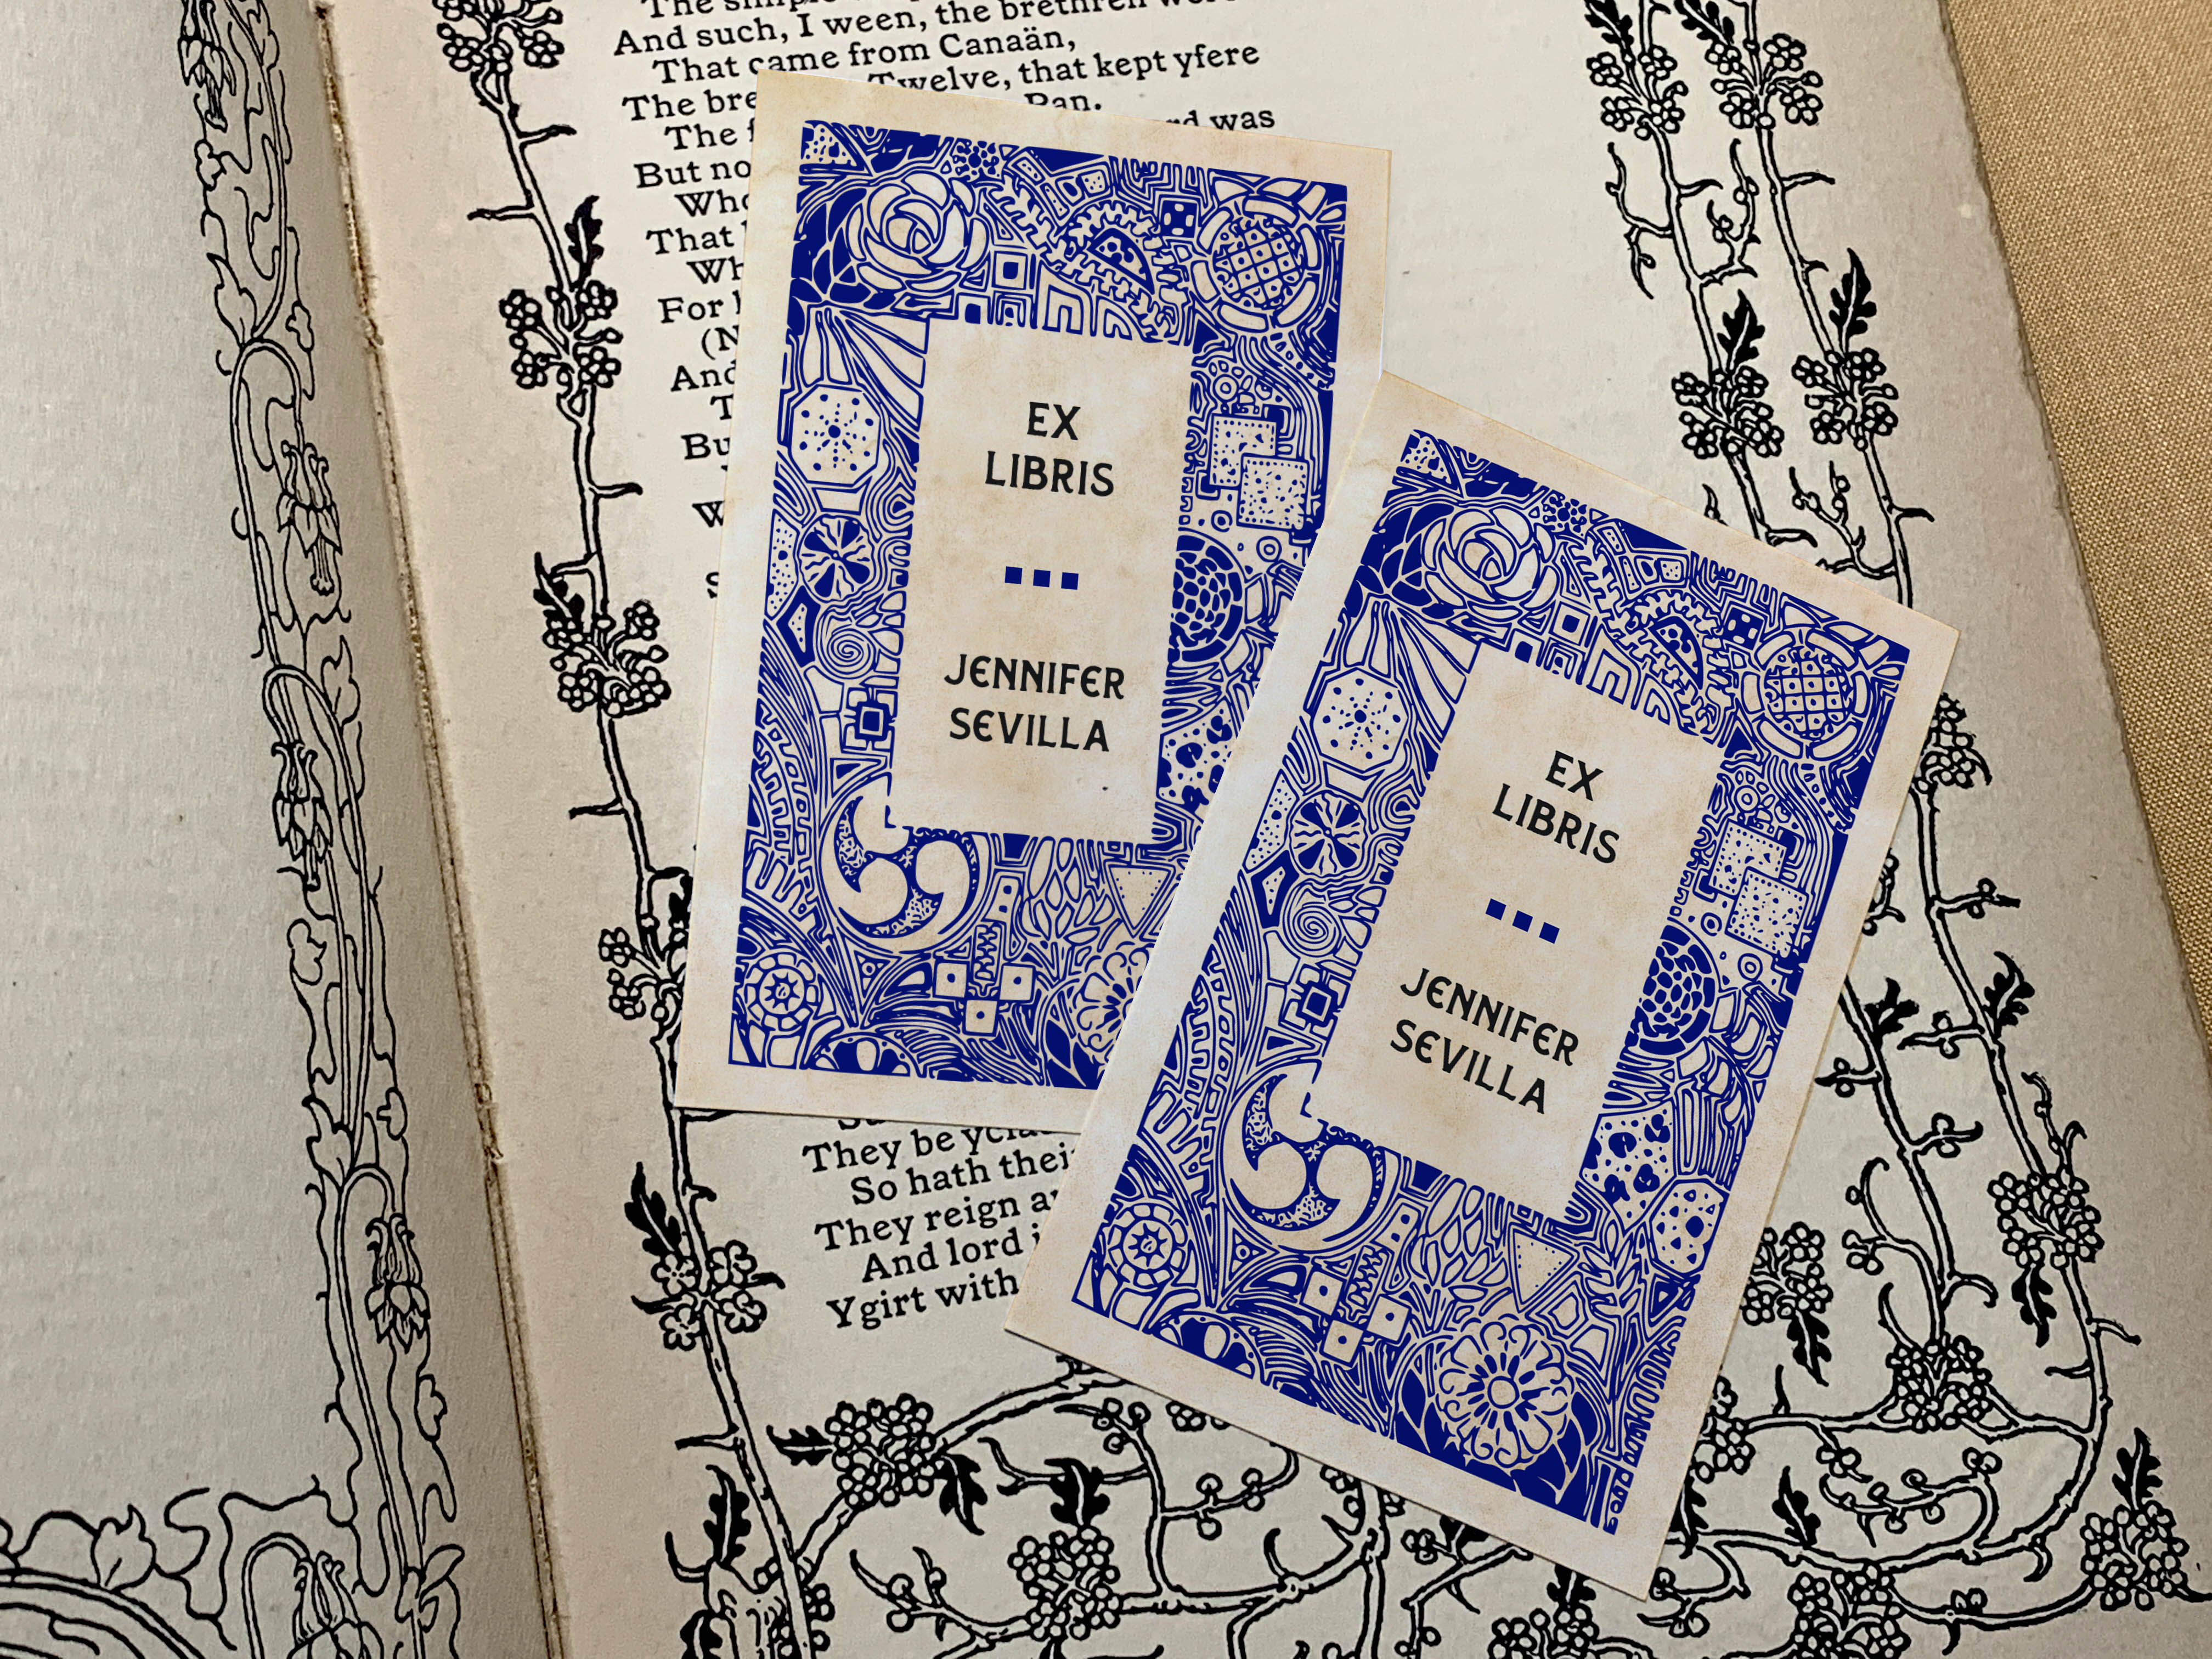 Mitsudomoe Woodcut, Personalized Ex-Libris Bookplates, Crafted on Traditional Gummed Paper, 2.5in x 4in, Set of 30